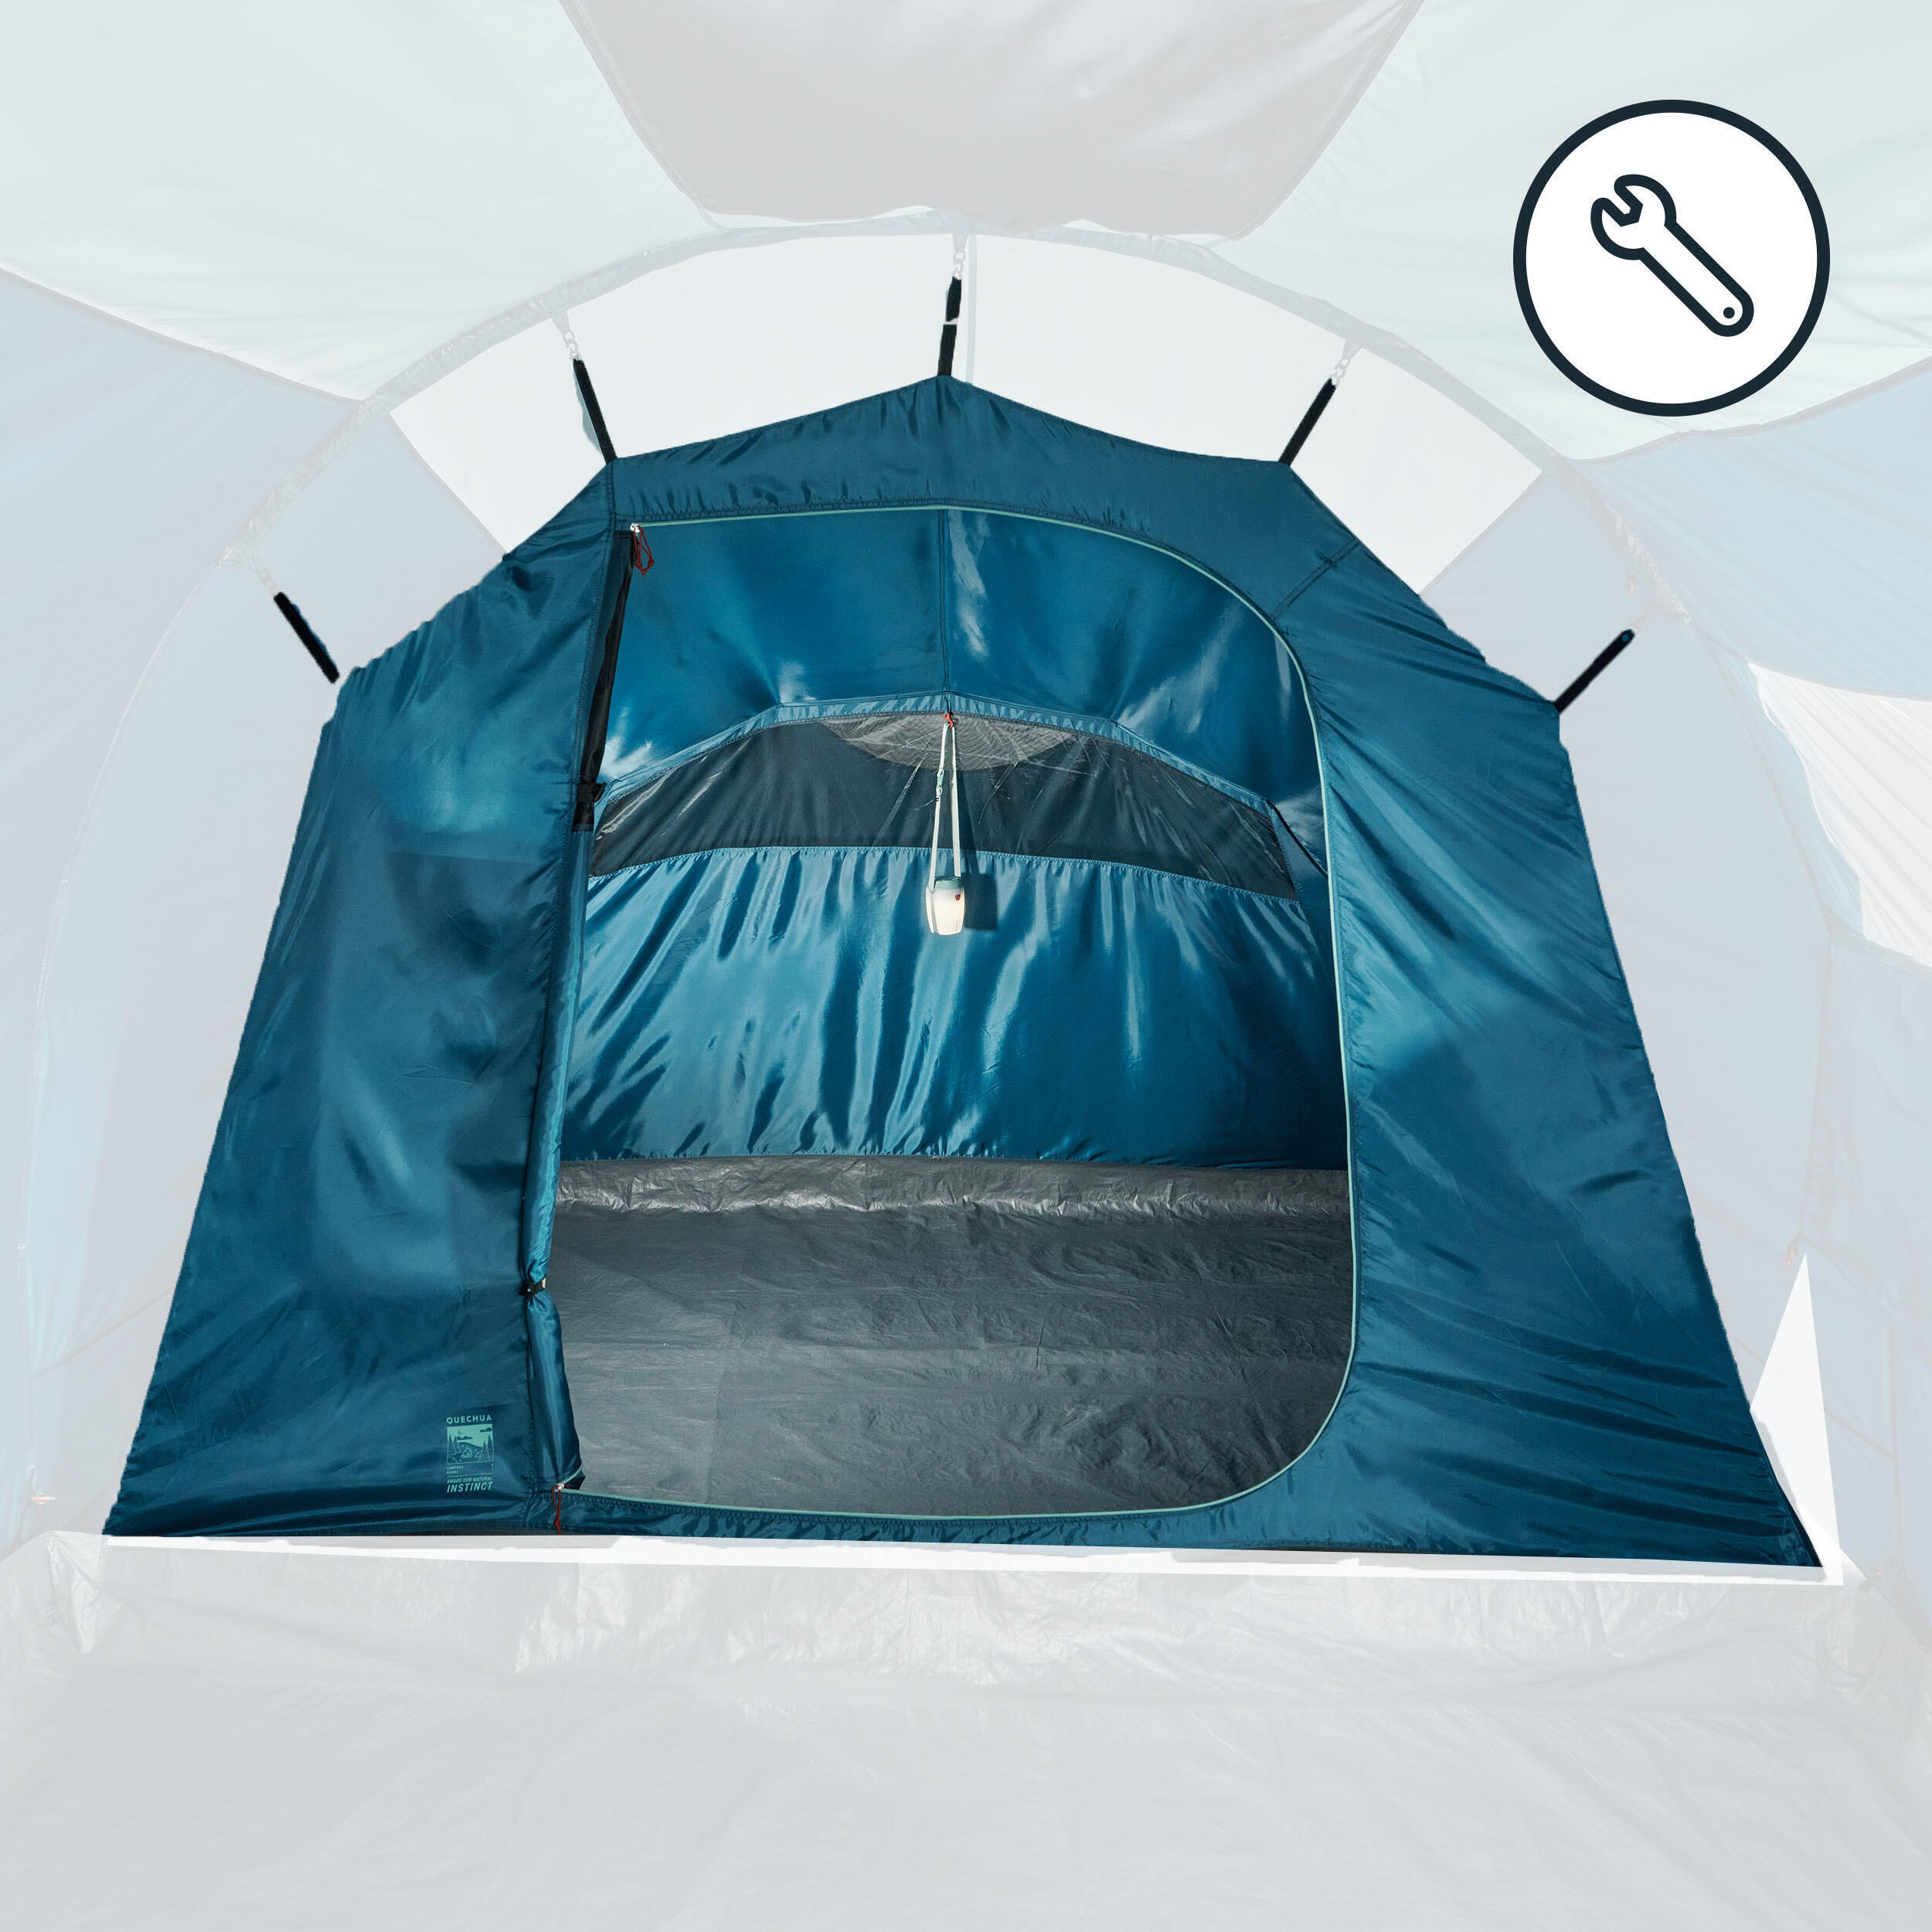 BEDROOM - SPARE PART FOR THE ARPENAZ 4.1 TENT 1/1